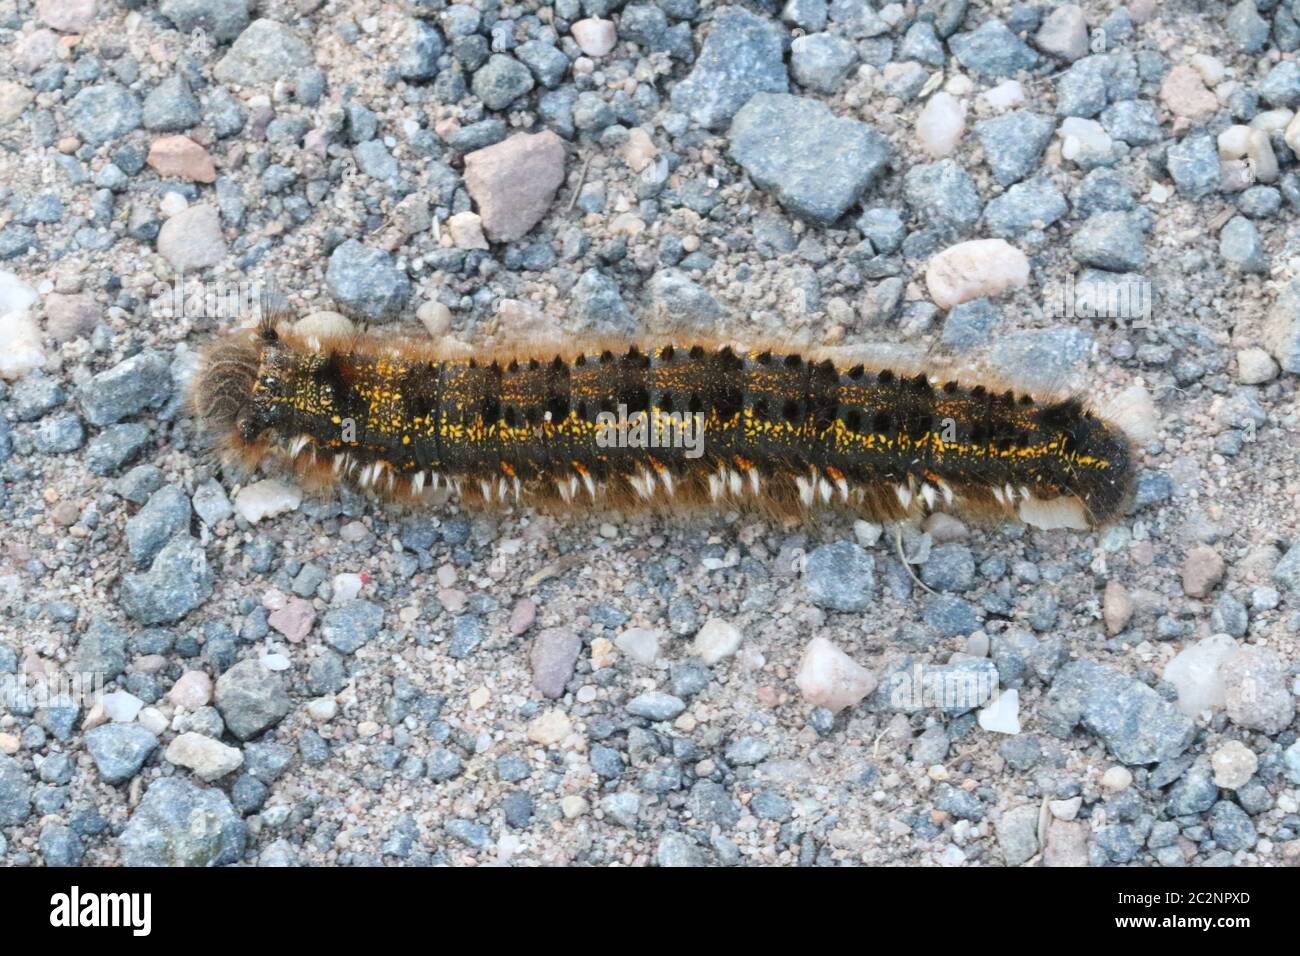 the larval stage of the Drinker moth (Euthrix potatoria), taken at Hunterston in Ayrshire. Stock Photo